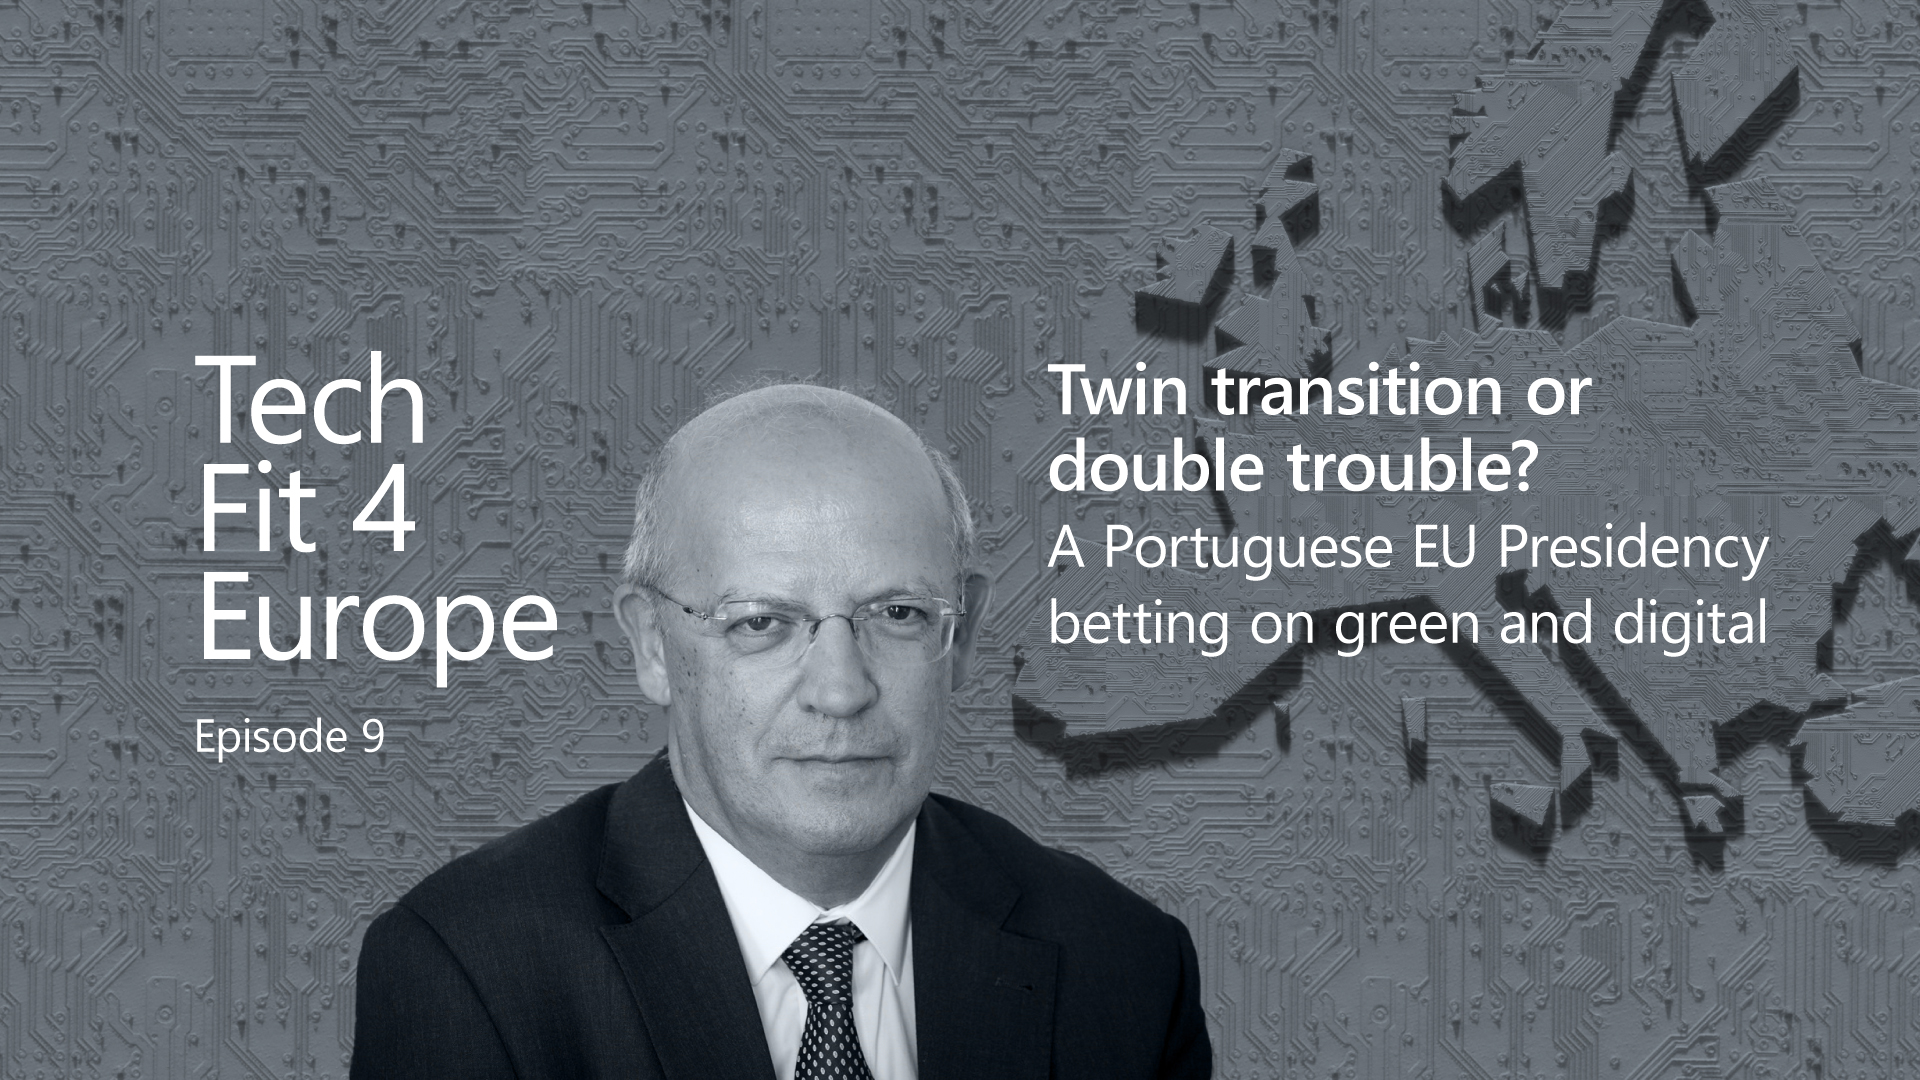 Twin transition or double trouble? A Portuguese EU Presidency betting on green and digital